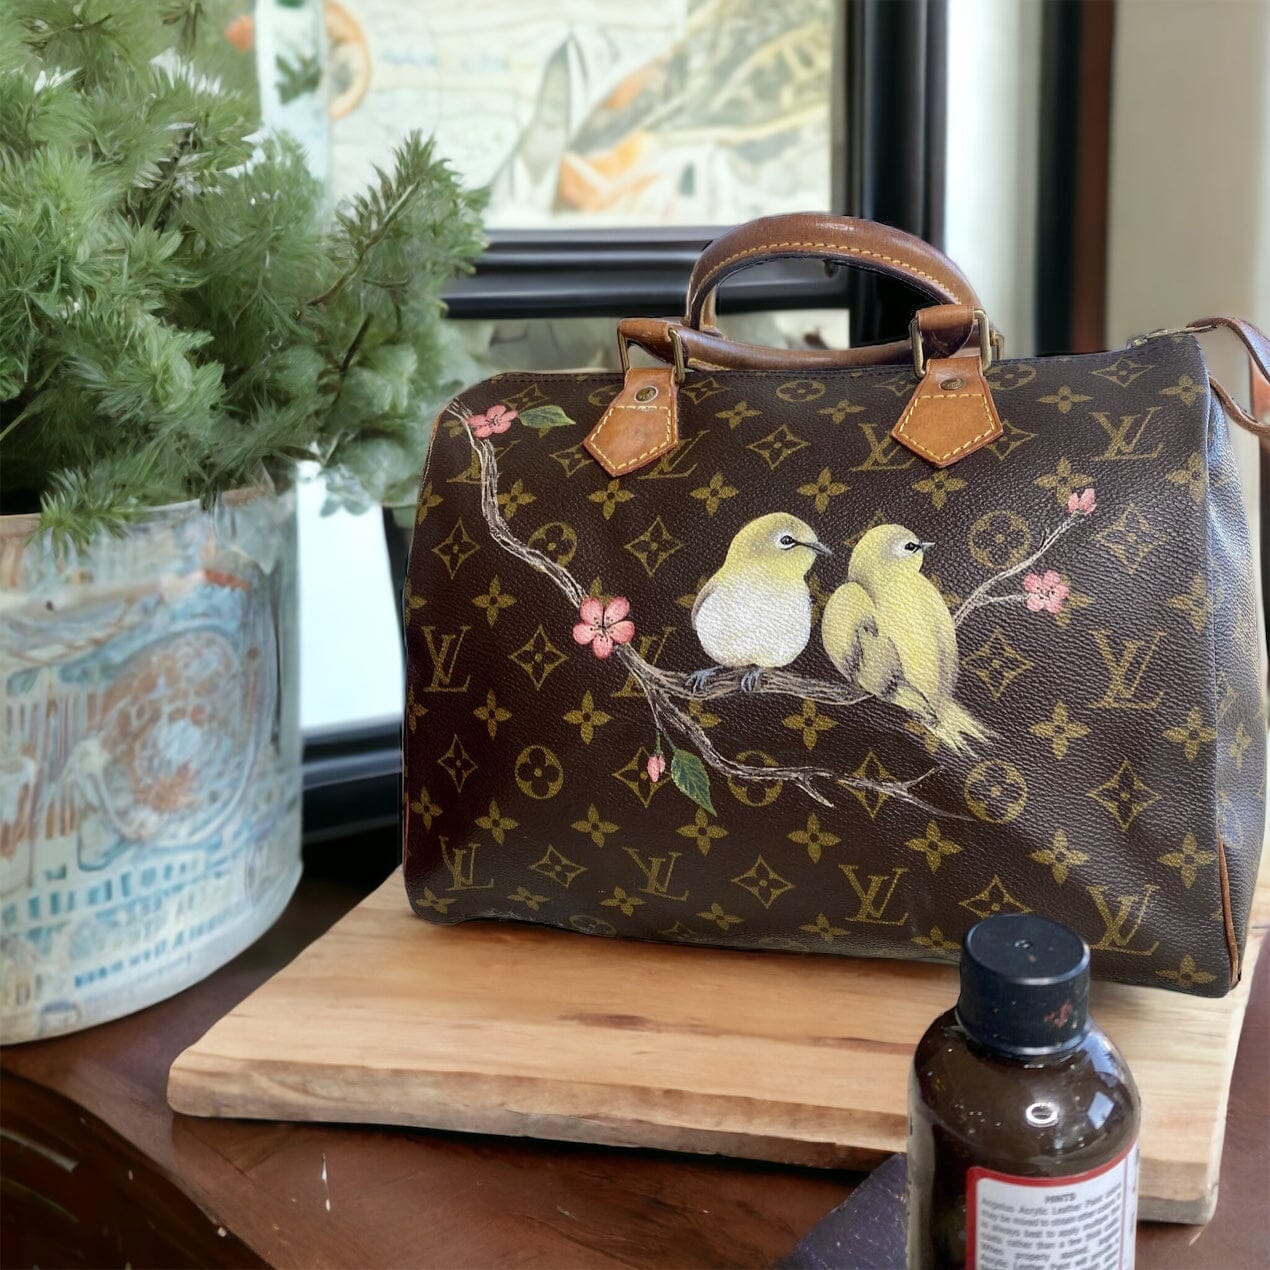 How to Customize Louis Vuitton Bags with Hand Painted Art - CgtDesigns